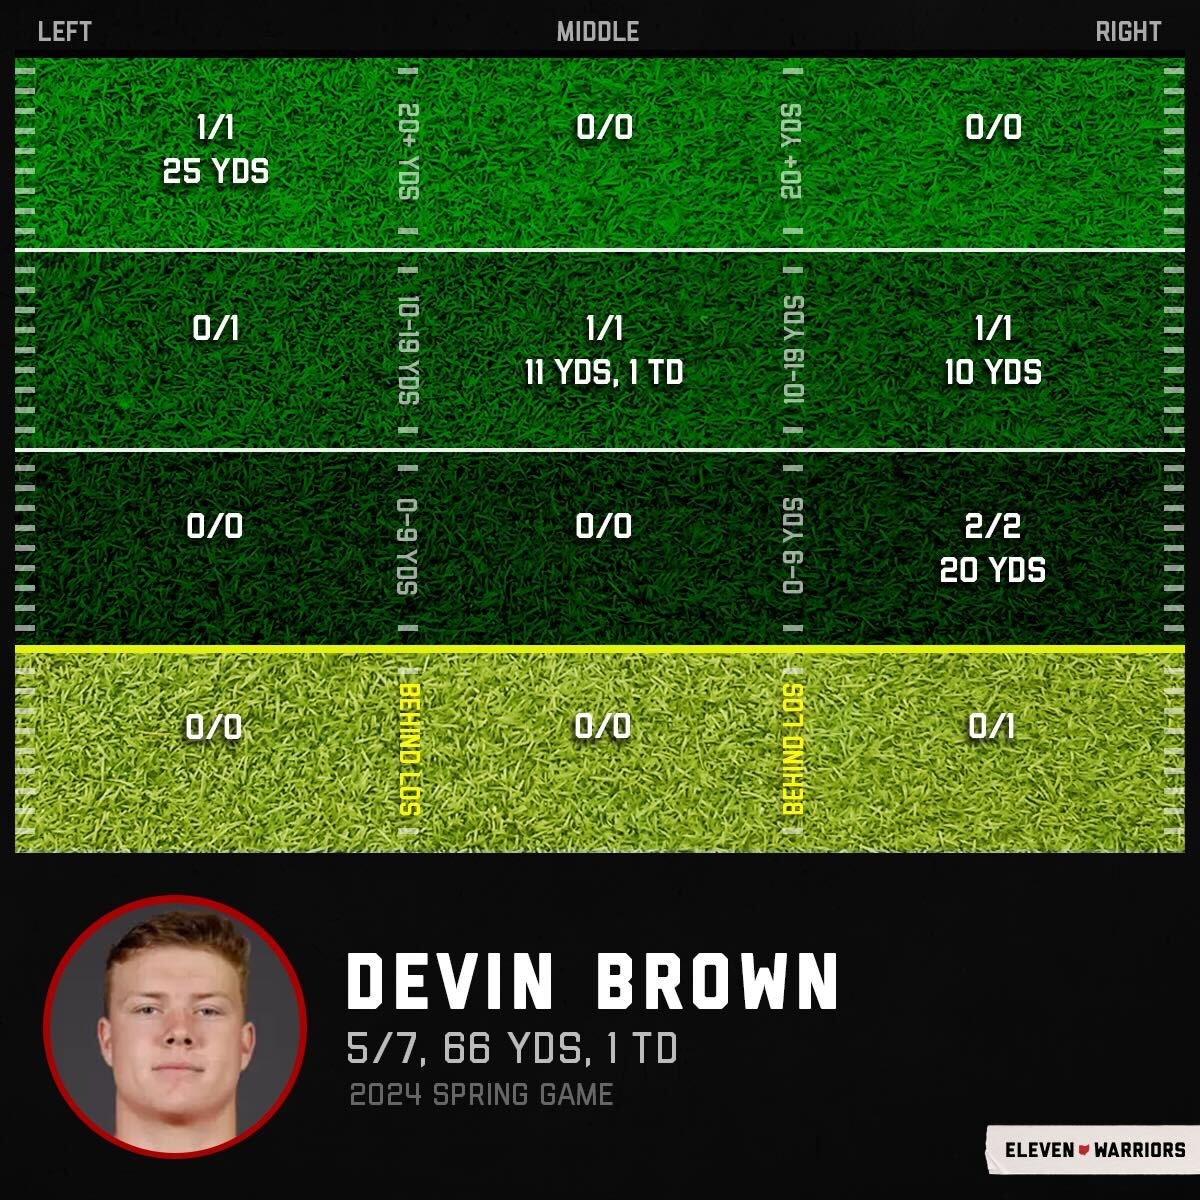 Devin Brown's passing chart in the 2024 spring game